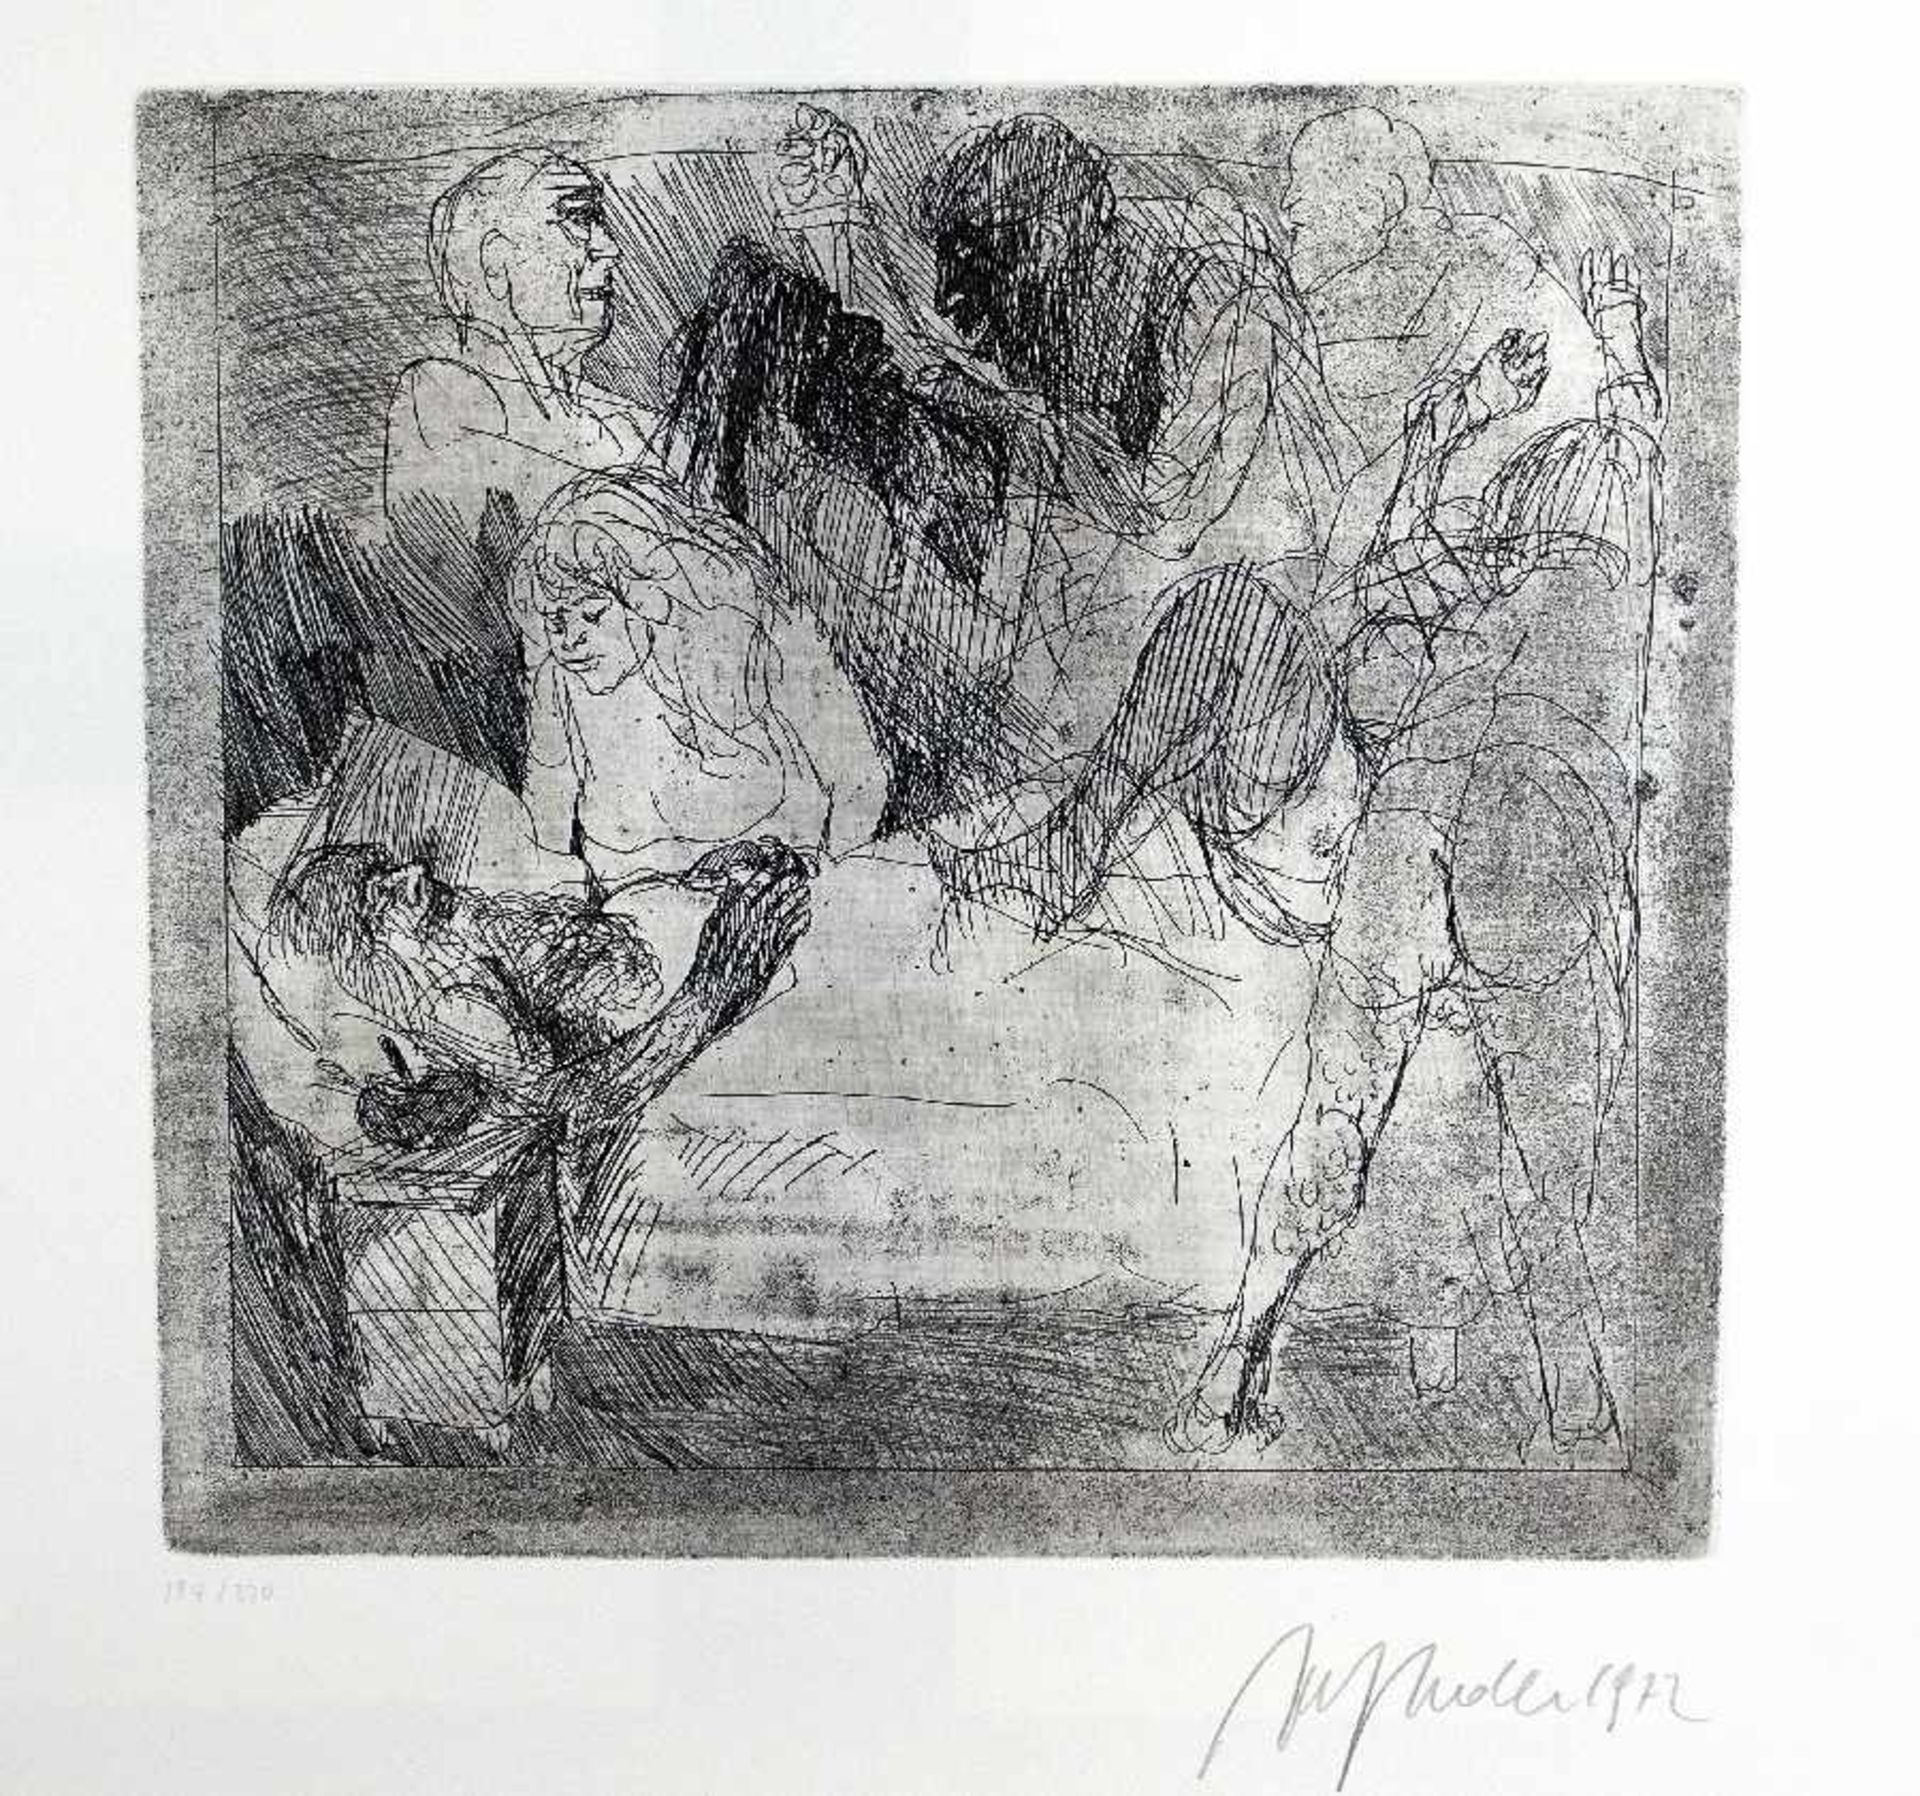 Alfred HrdlickaWien 1928 - 2009AmnonEtching on paper; H 303 mm, W 322 mm; signed and dated lower